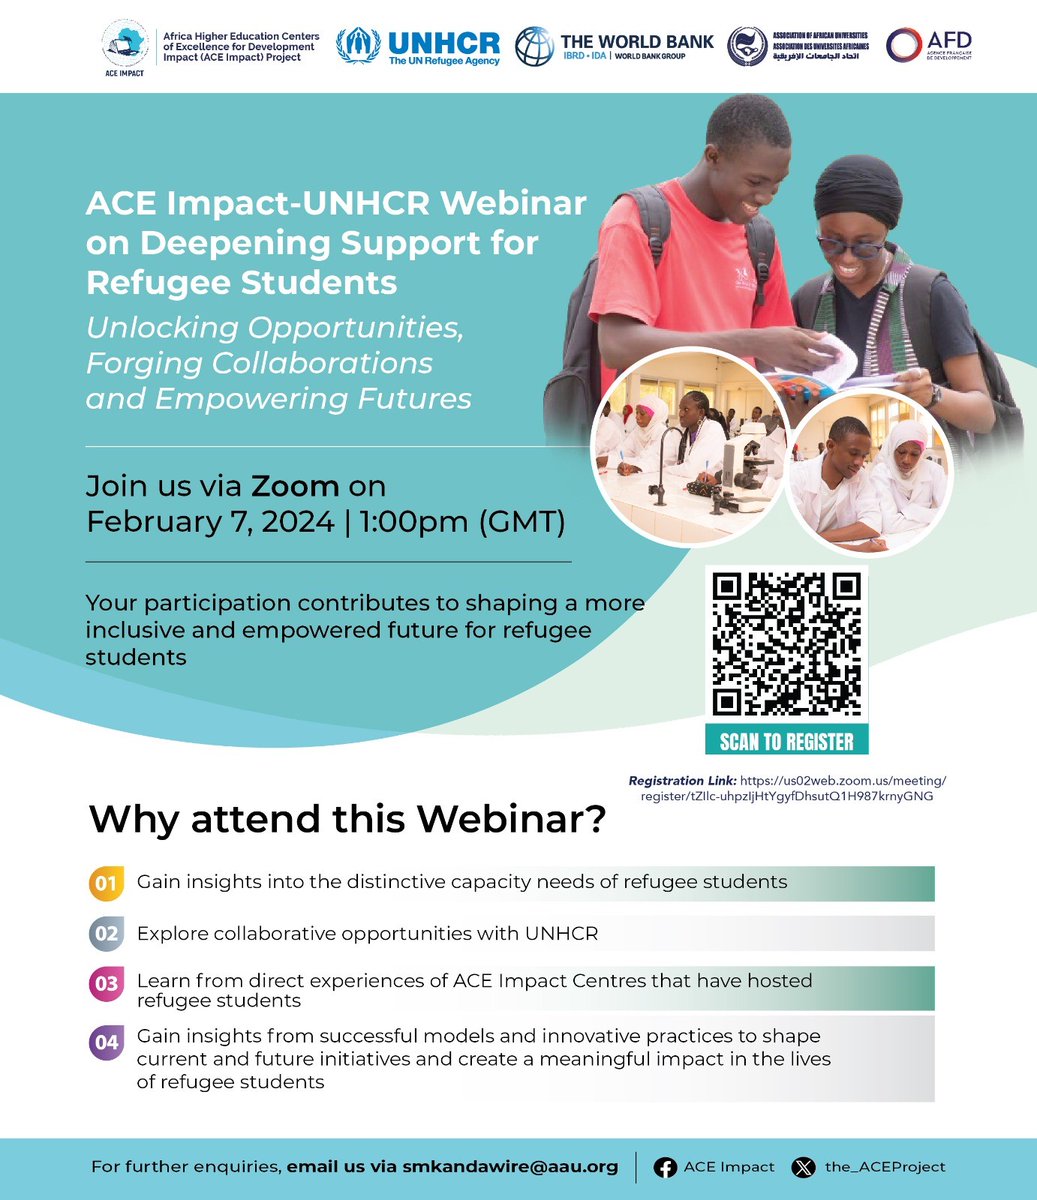 ACE Centers, join the upcoming webinar on Wednesday, Feb 7, 2024, at 1:00 p.m. (GMT) to explore collaborative #opportunities with #UNHCR in supporting #refugee #students at center level. Scan QR code to register. #RefugeeEducation #ACEImpact #ACECentres